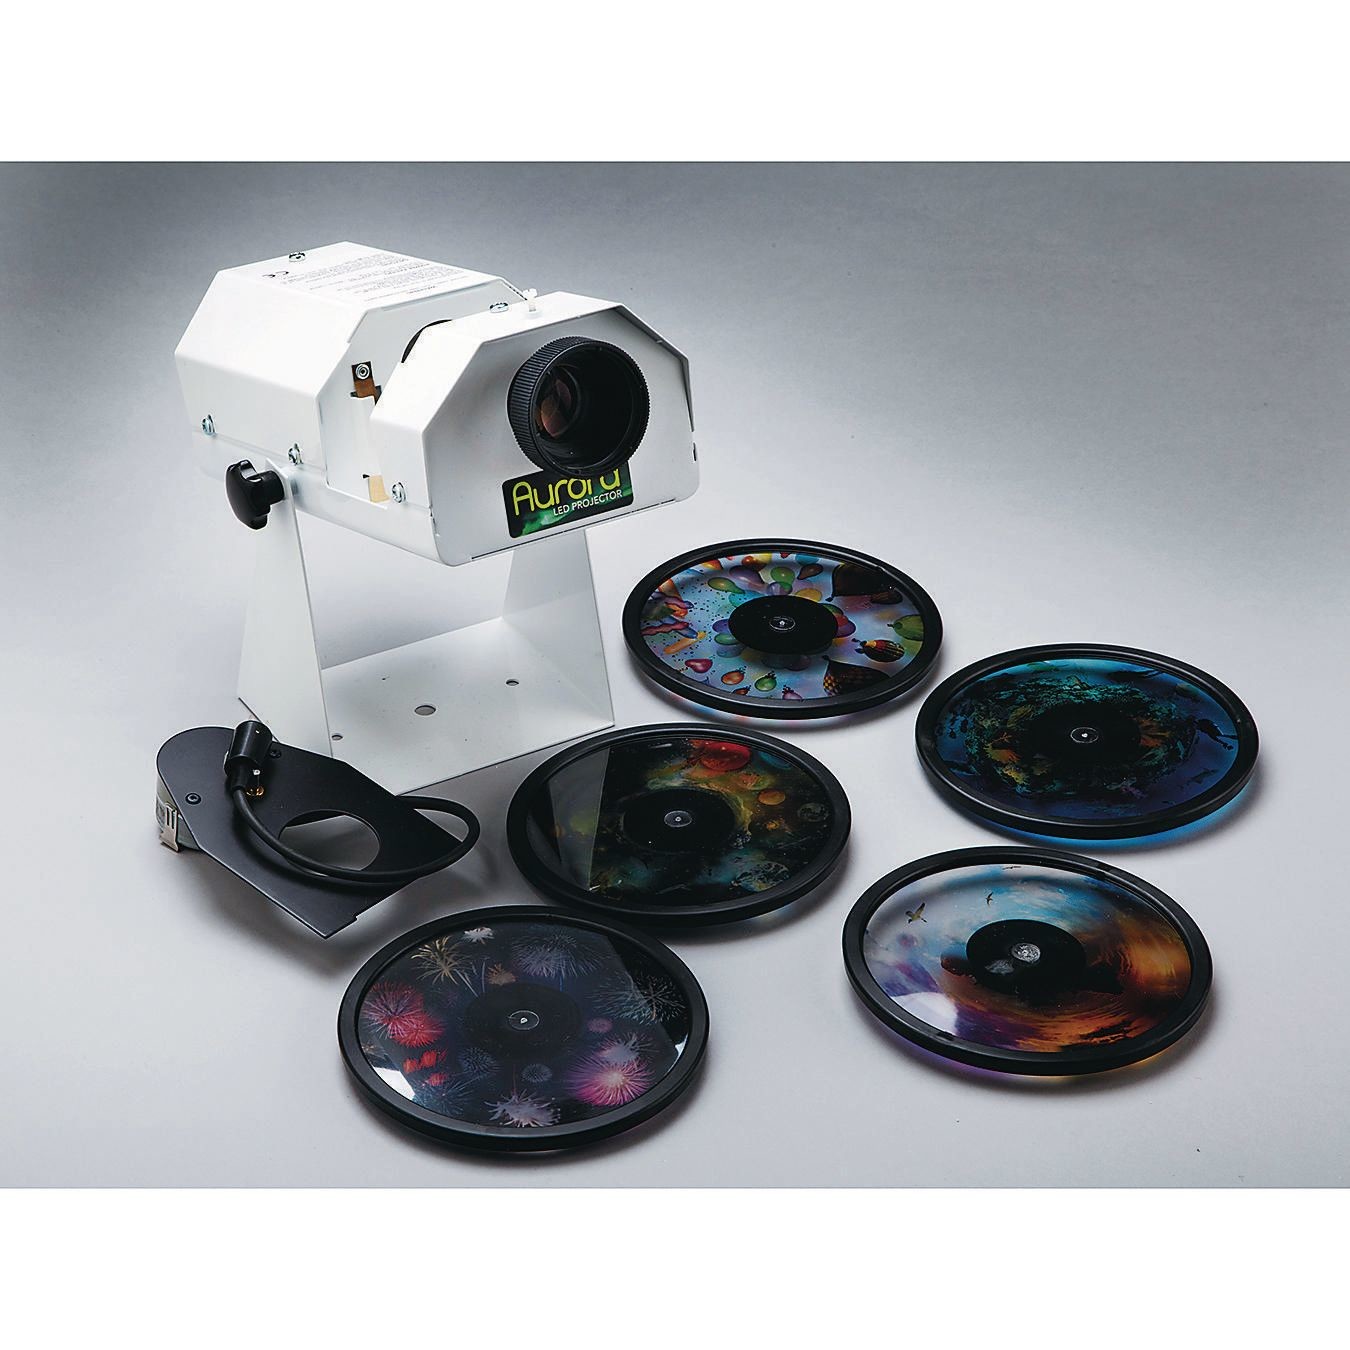 Buy Aurora Projector And Effect Wheels Bundle at Worldwide